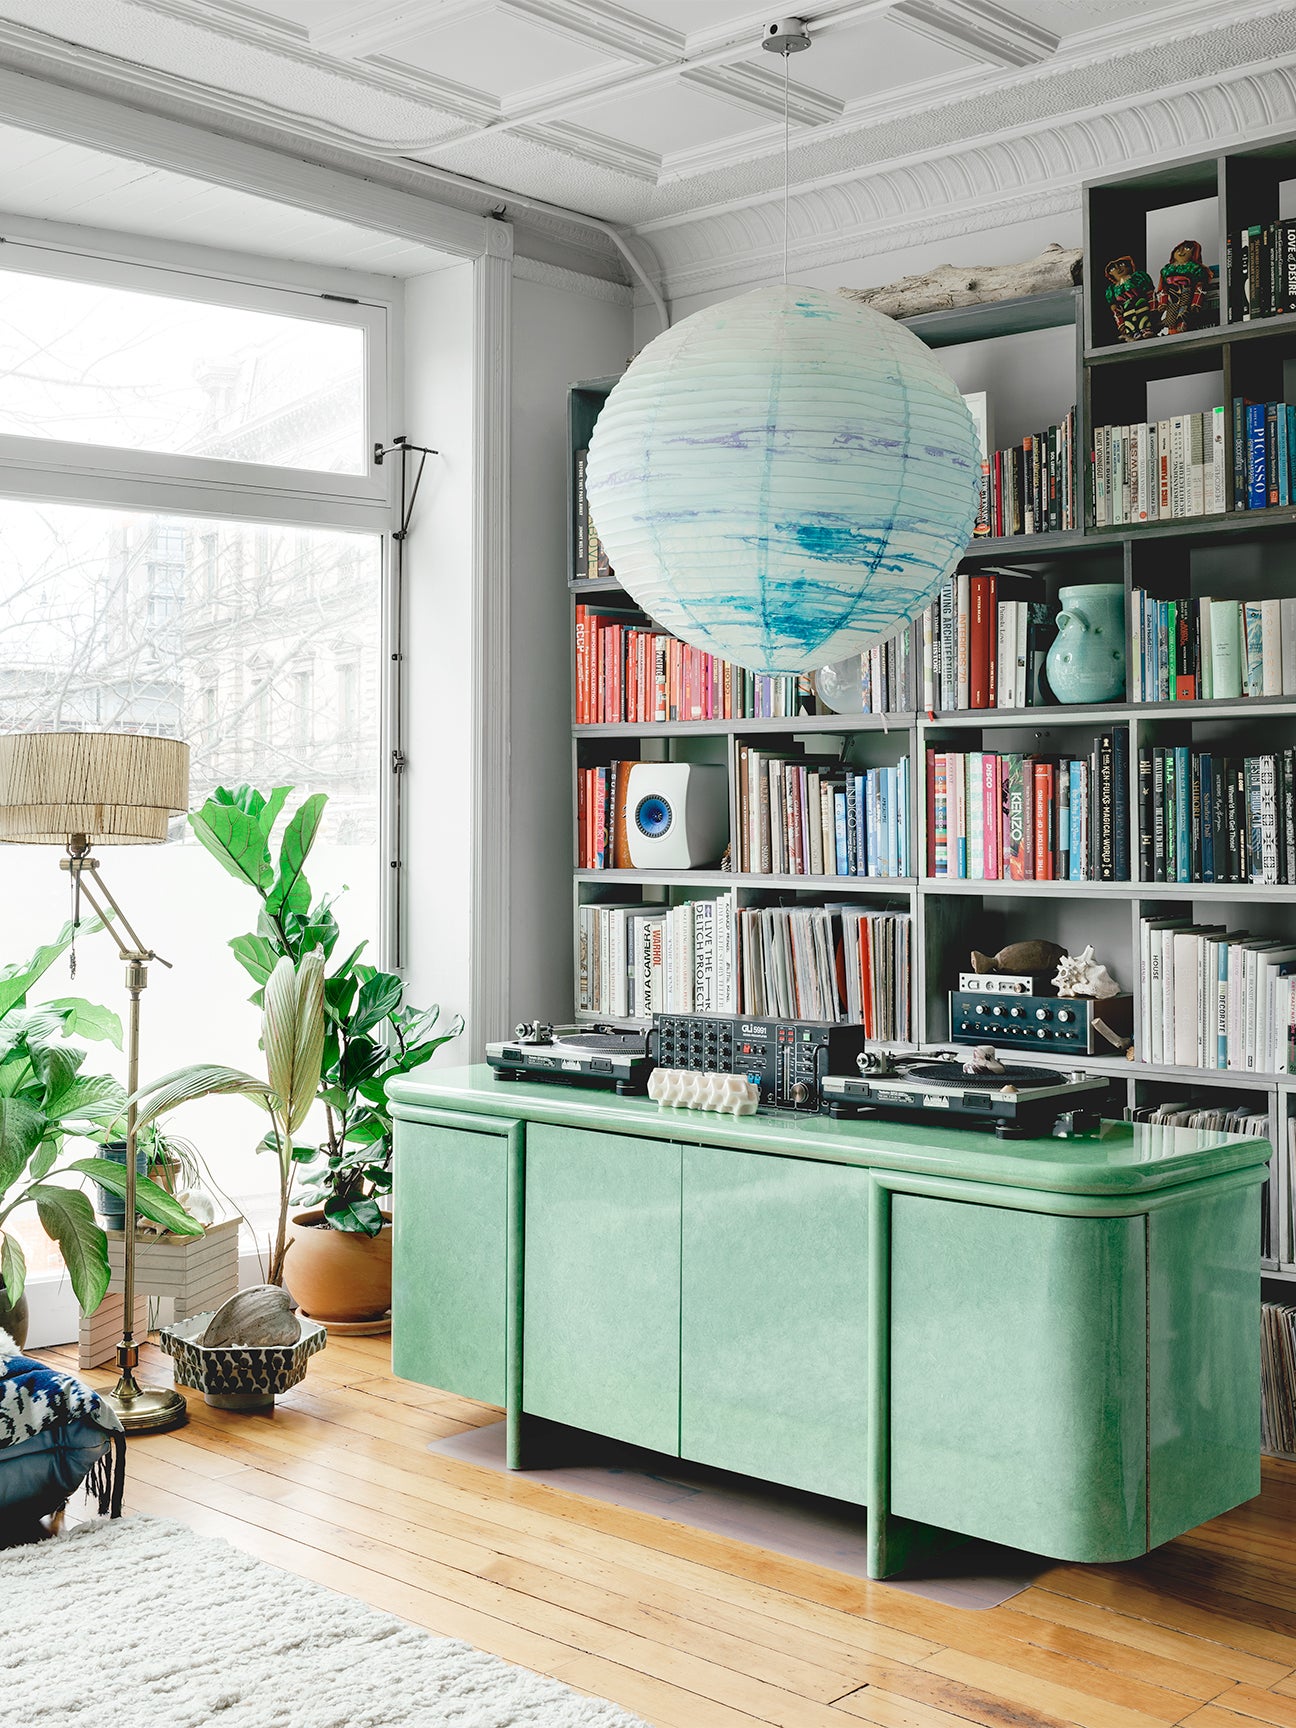 Room with green console and colorful bookshelf.